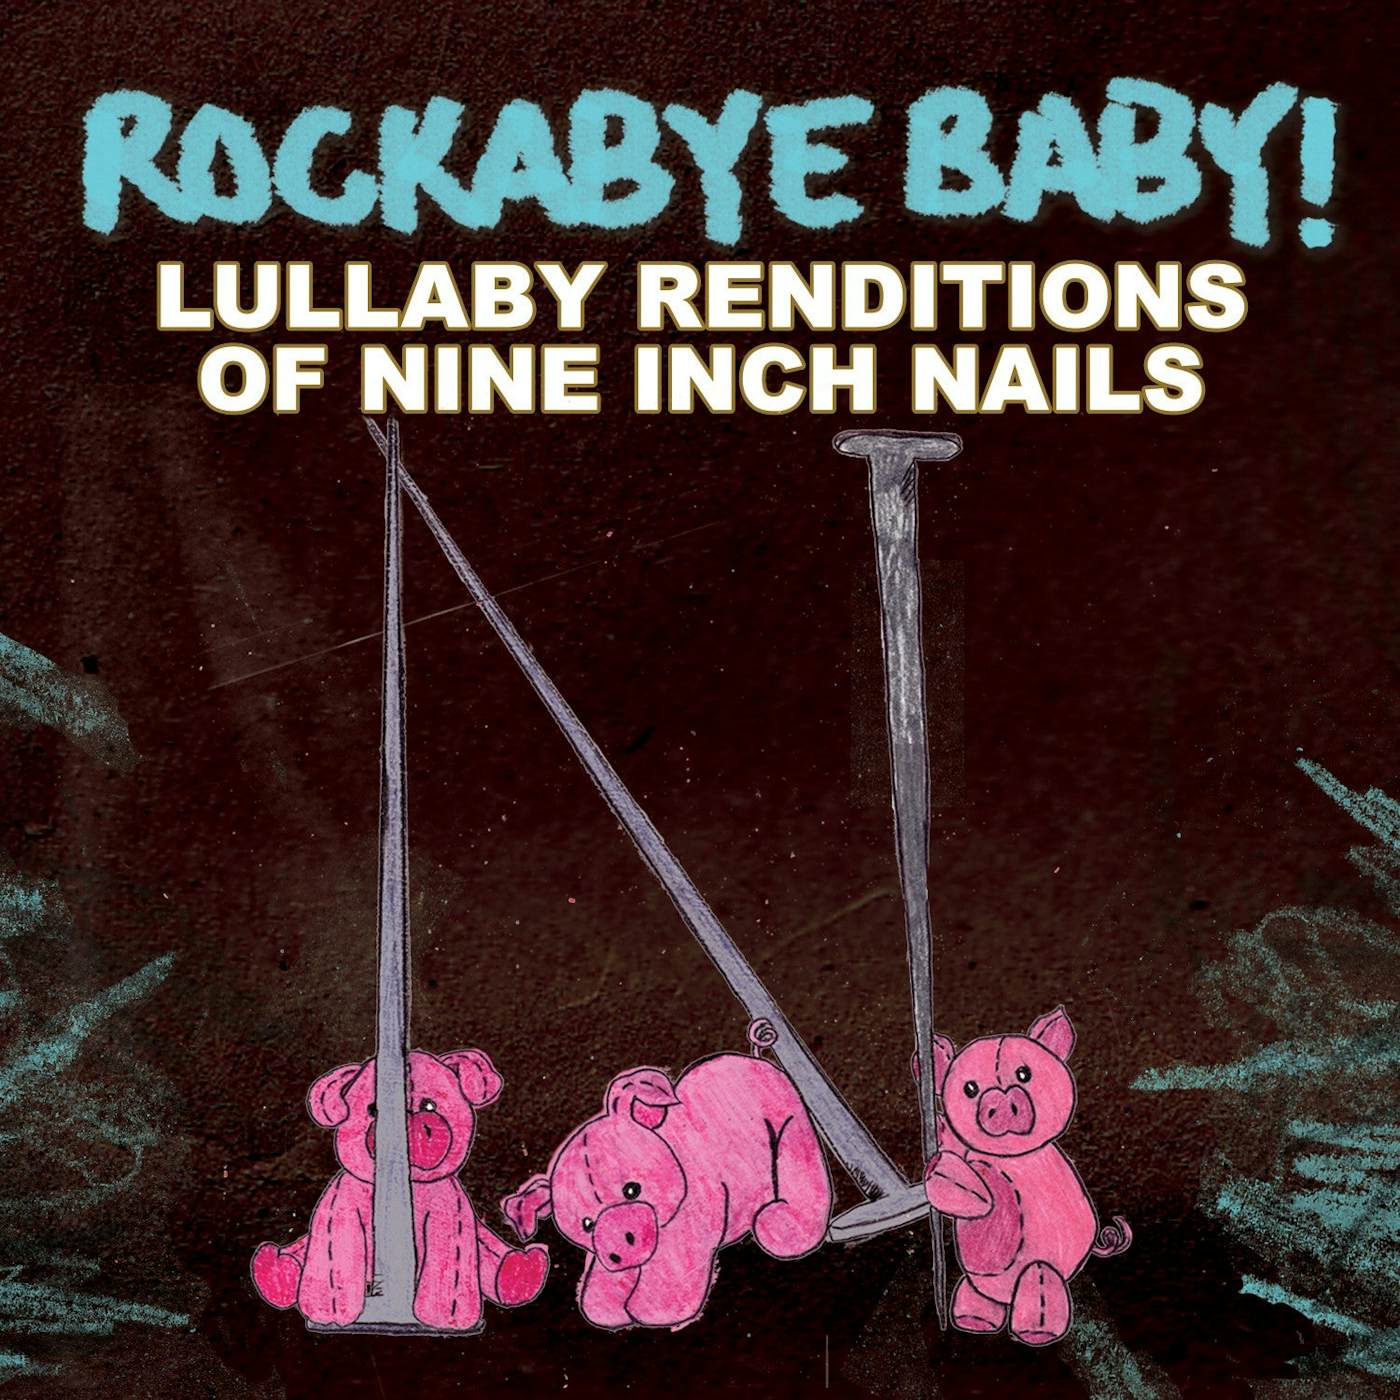 Rockabye Baby! Lullaby Renditions of Nine Inch Nails